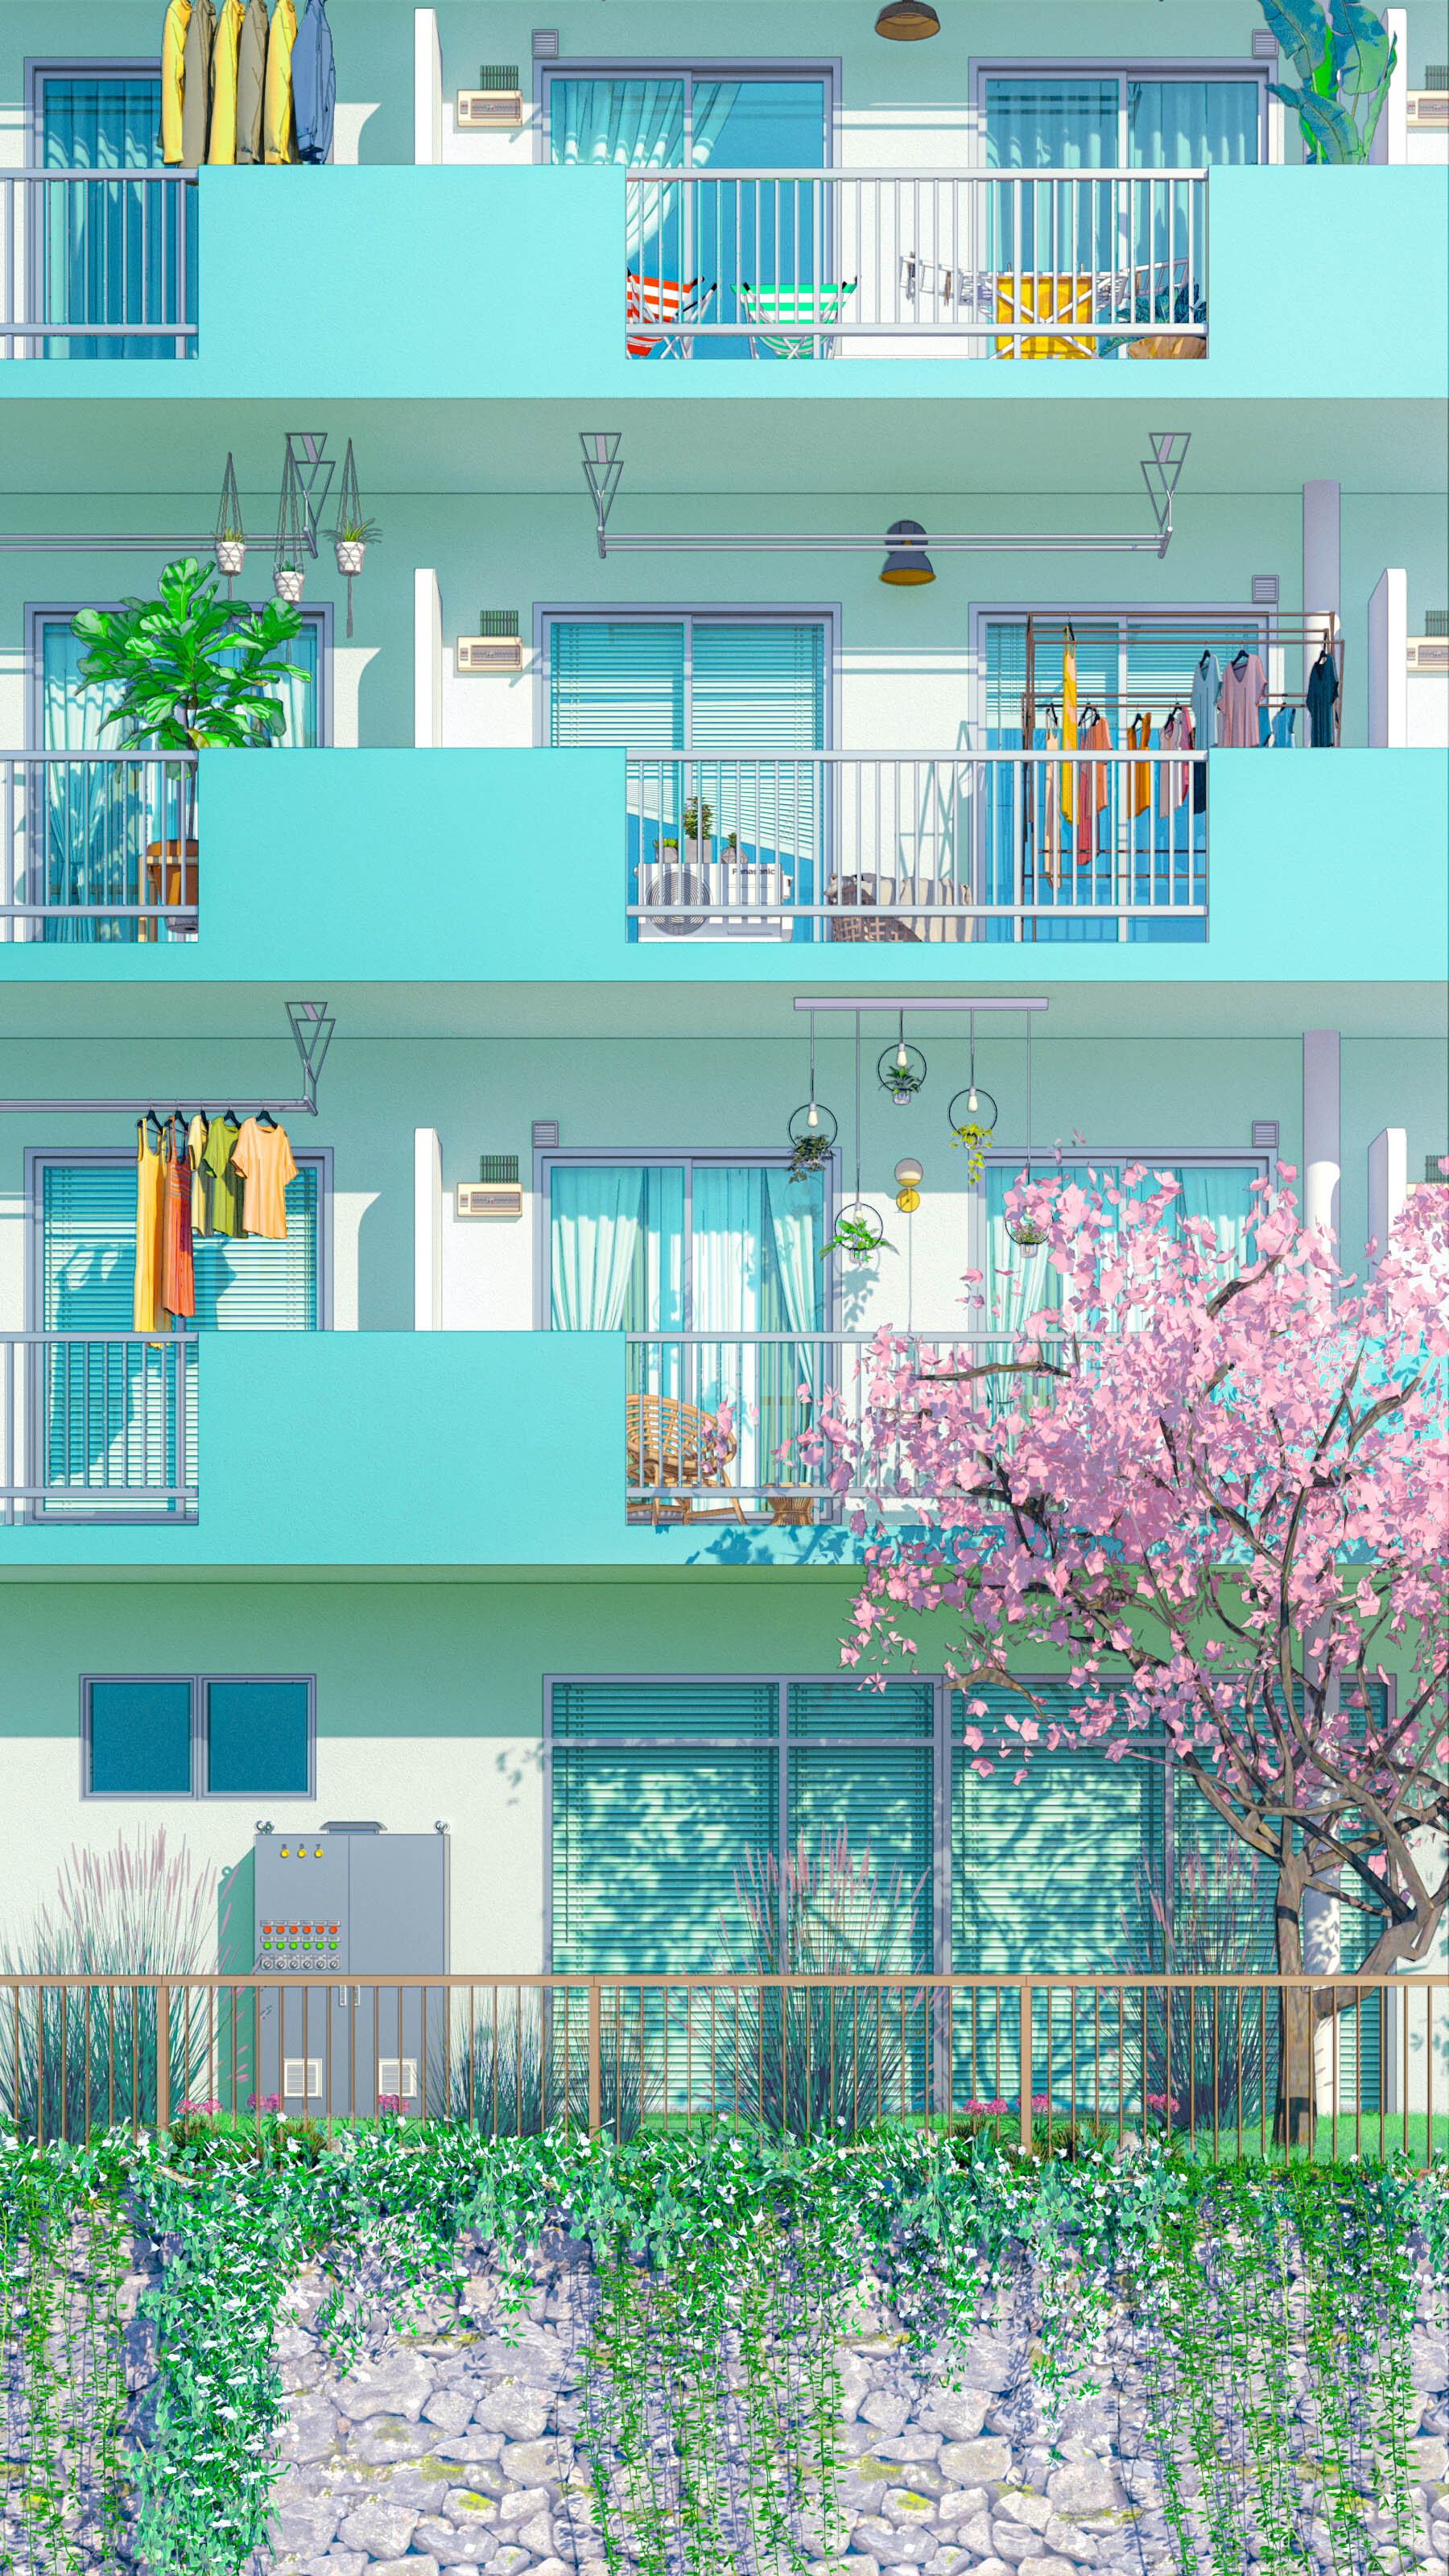 General 1800x3200 artwork digital art building balcony trees washing clothes deck chairs apartment ivy flowerpot